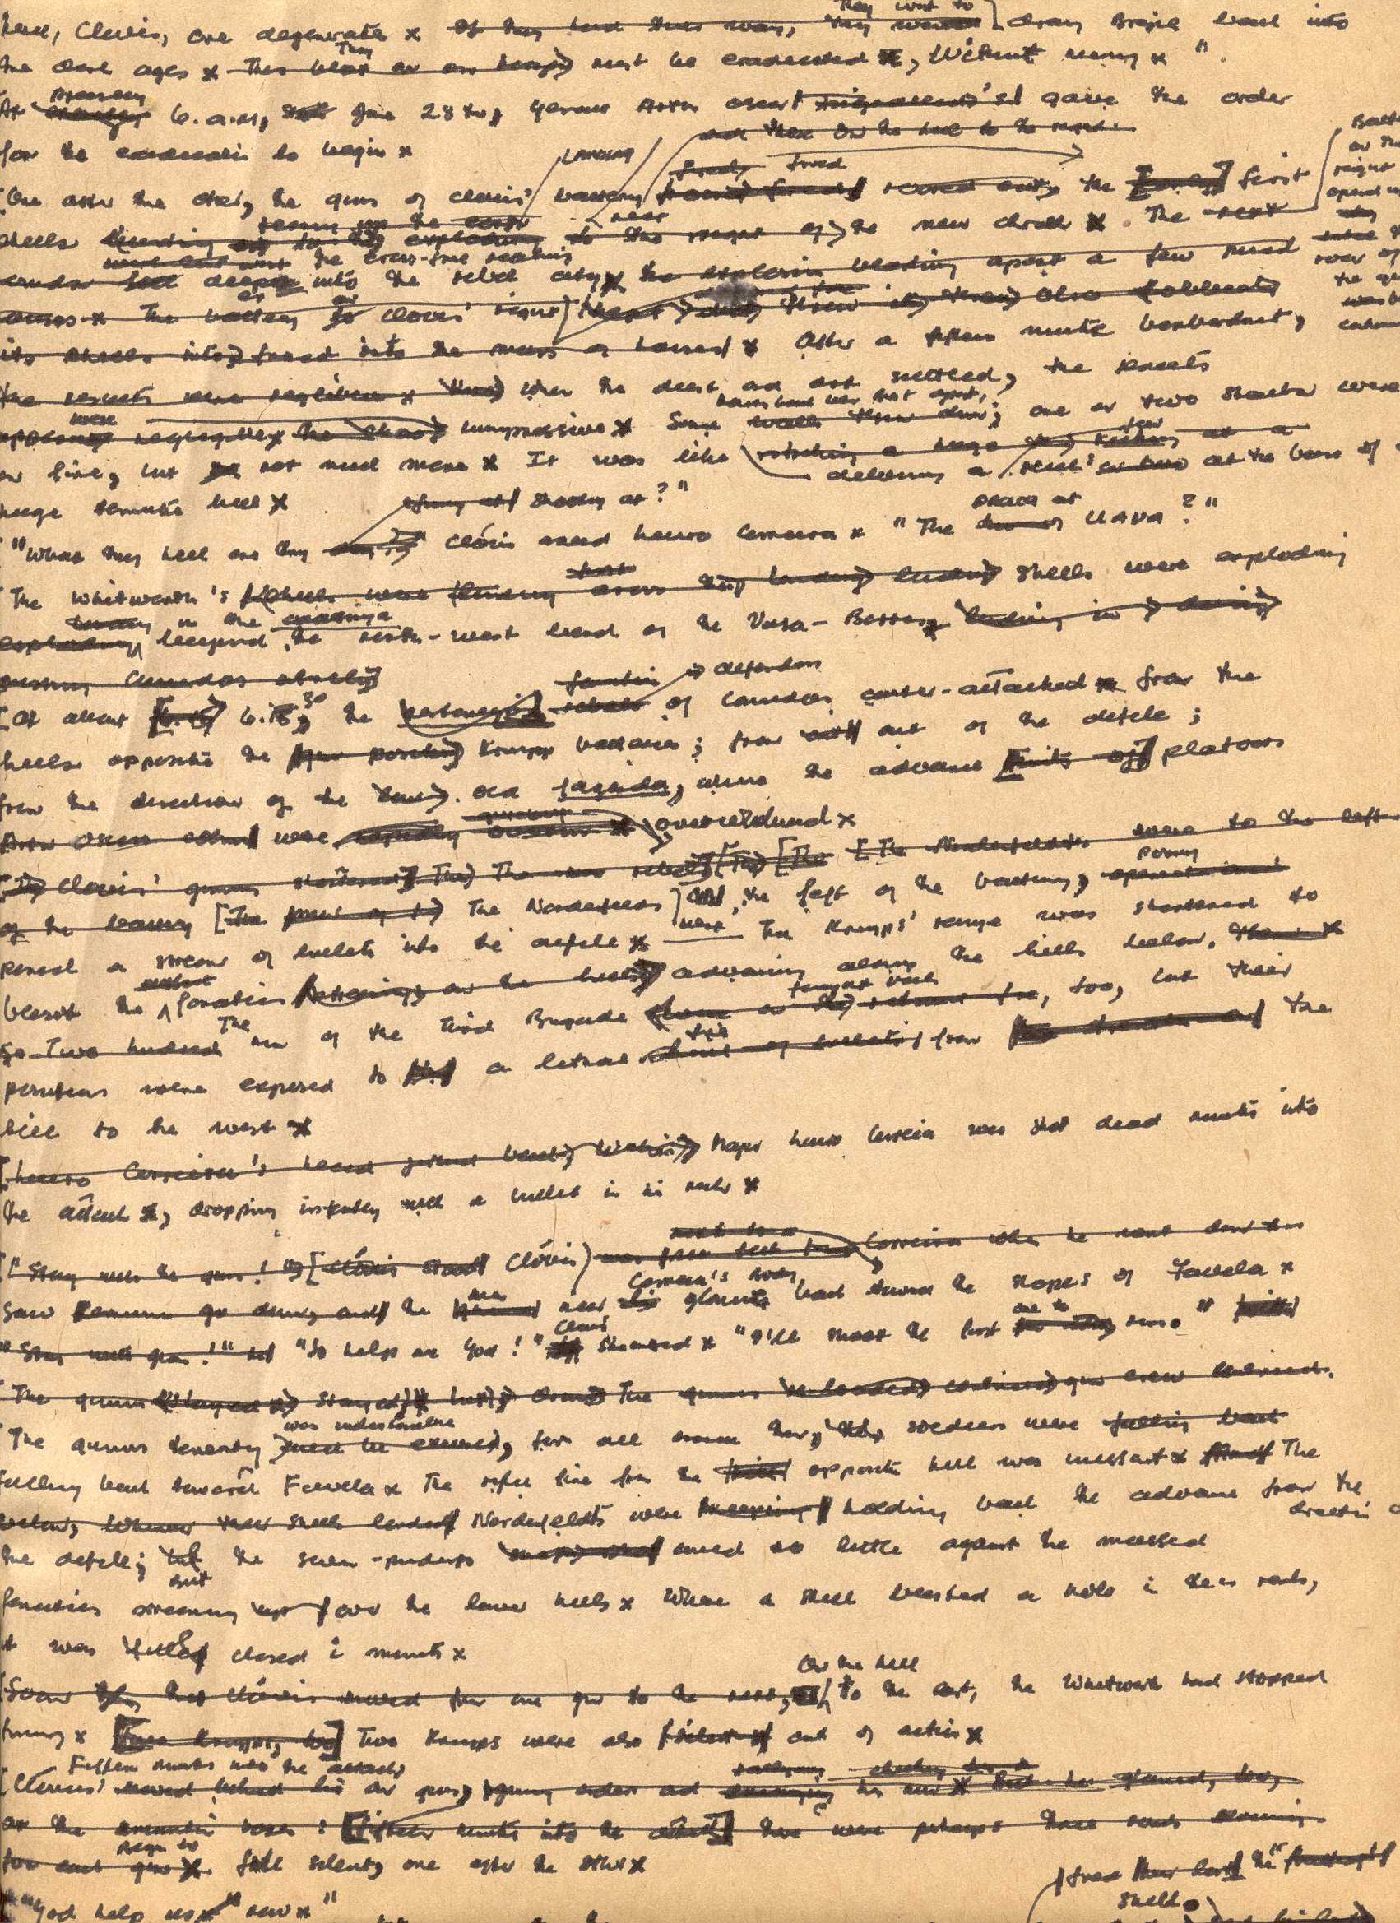 Original manuscript for the epic of Brazil by Errol Lincoln Uys